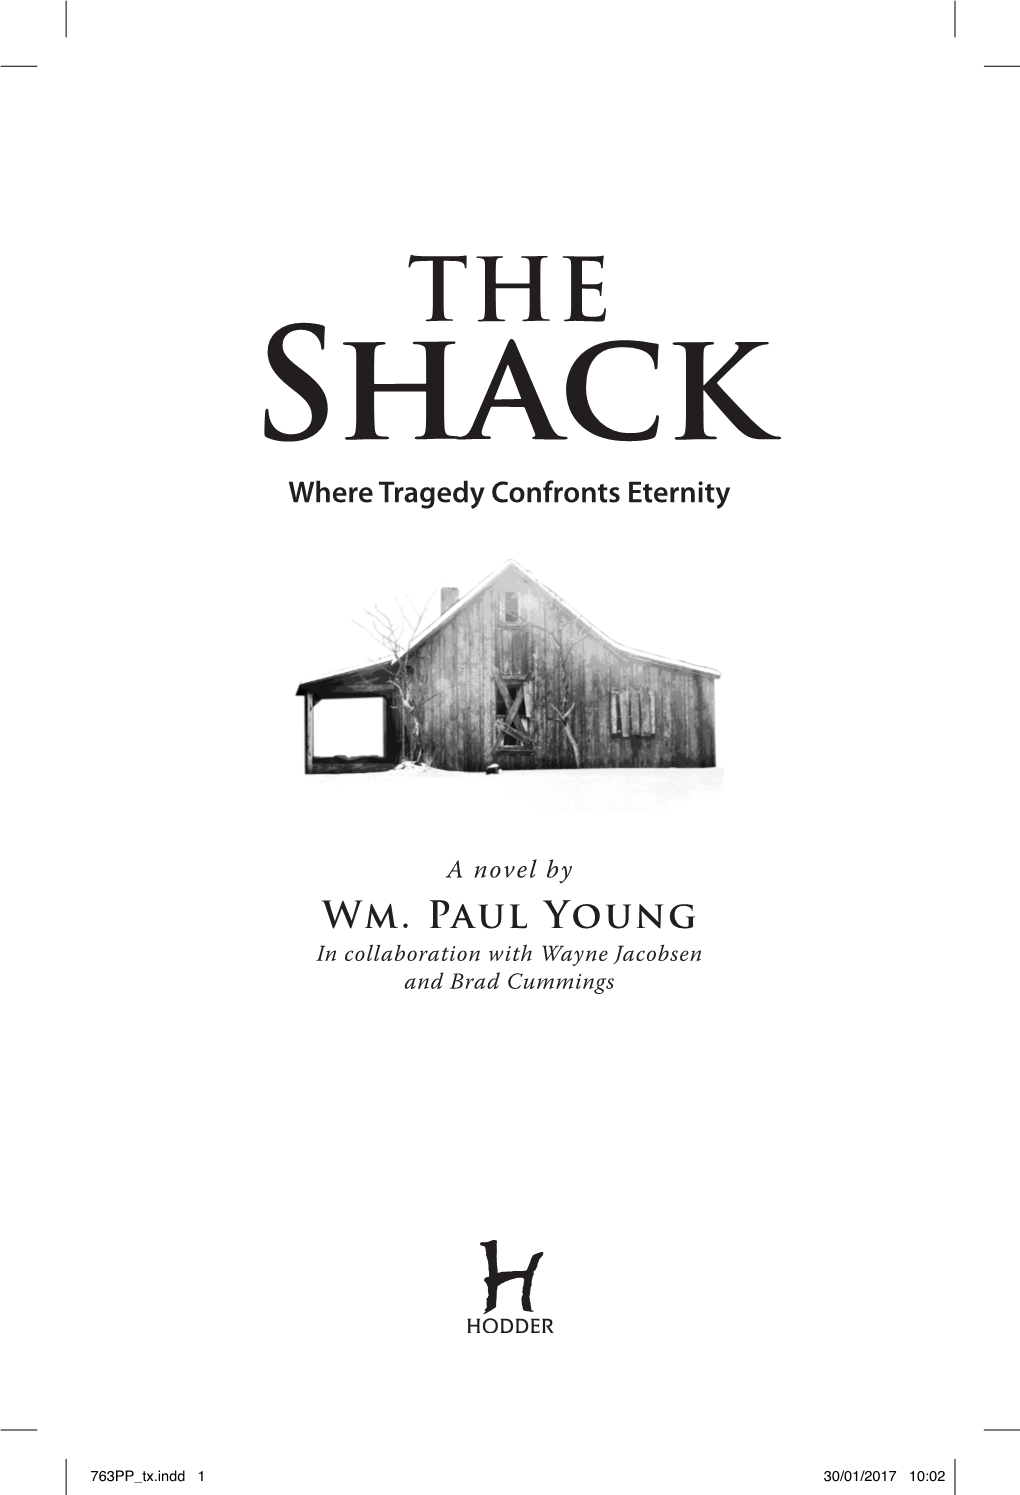 THE Shack Where Tragedy Confronts Eternity